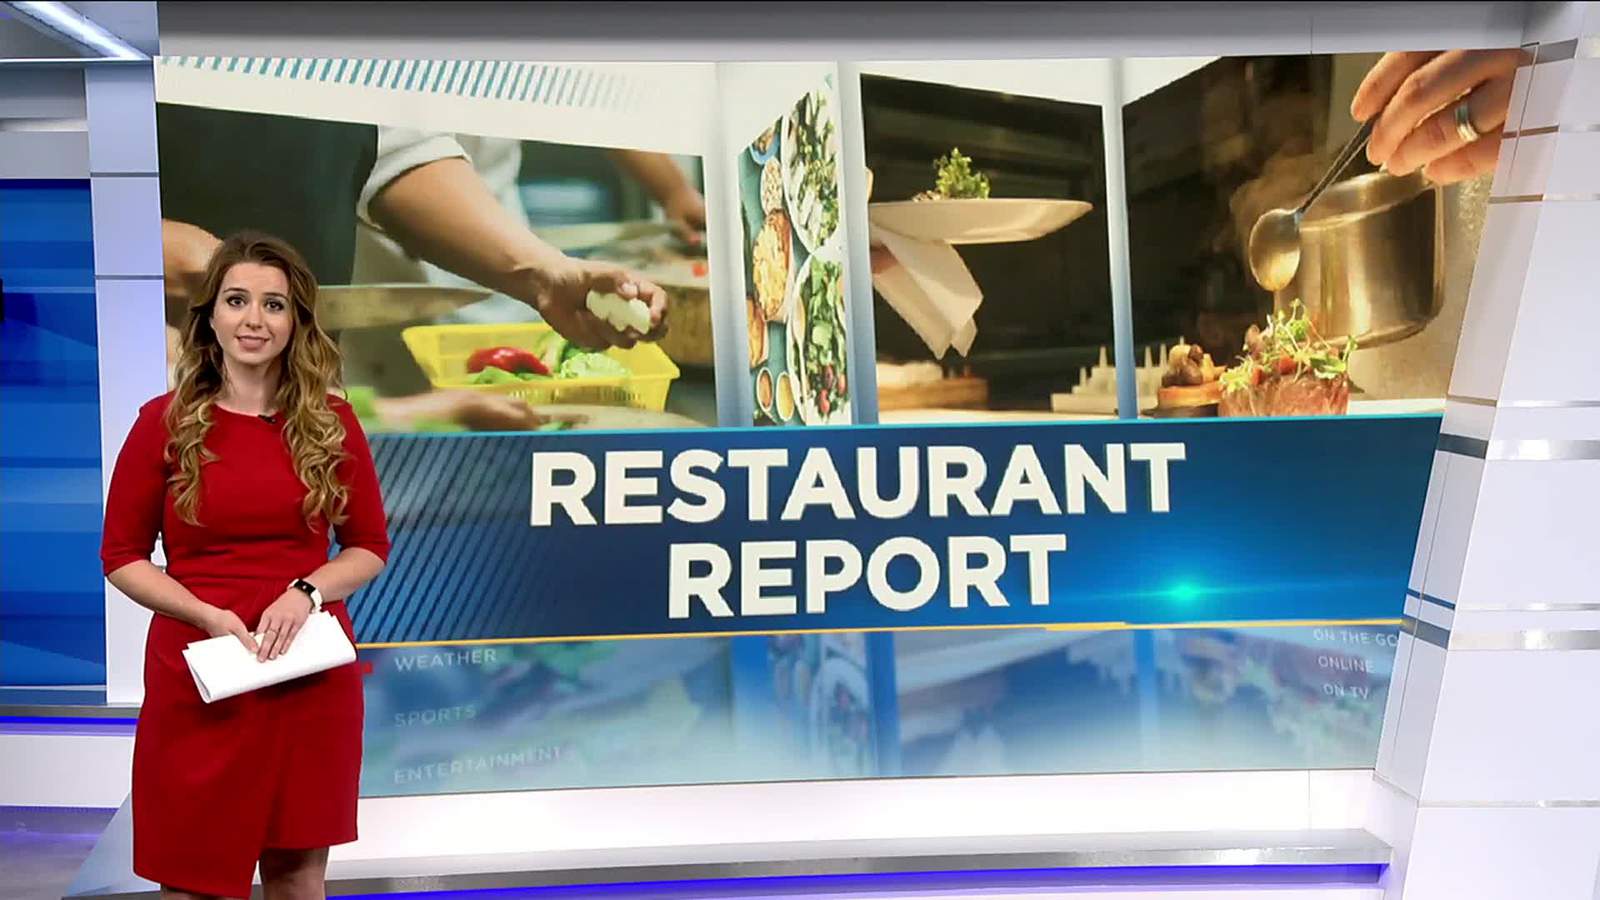 Repeat offender: Restaurant shut down twice in 3 months for rodent droppings